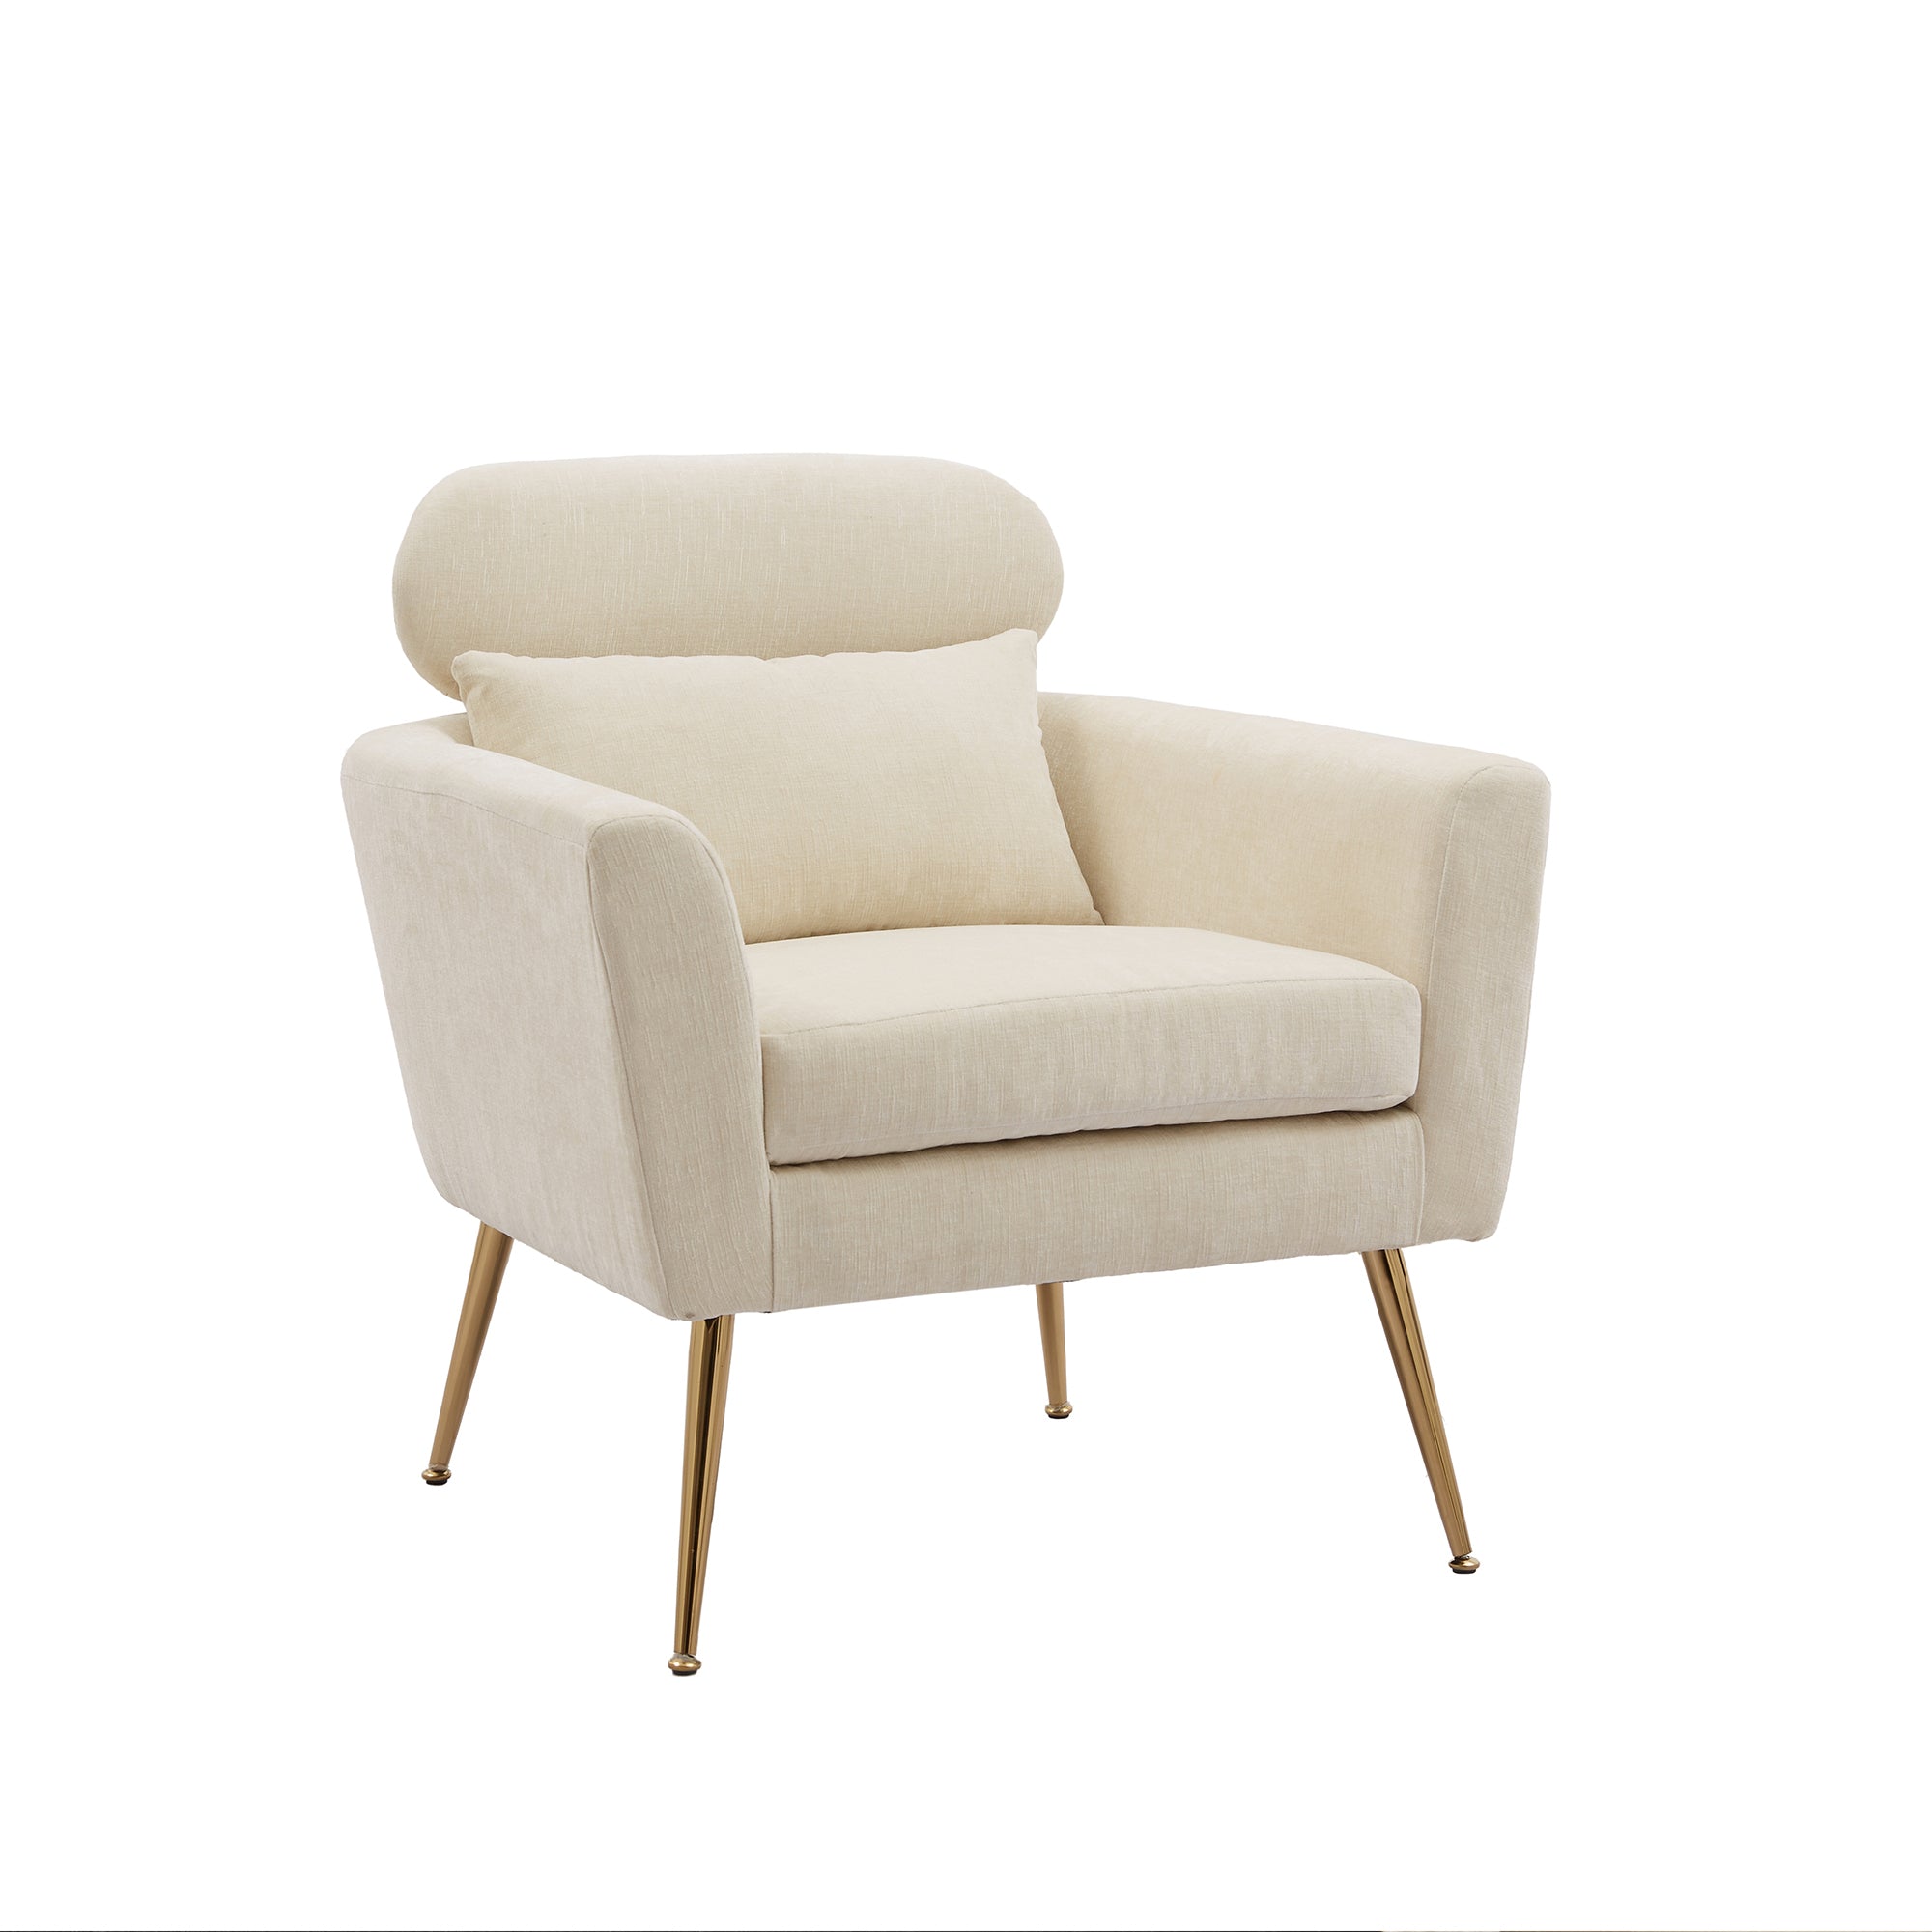 Modern Chenille Upholstered Single Sofa Leisure Club Chair with Gold Metal Leg and Throw Pillow - Beige